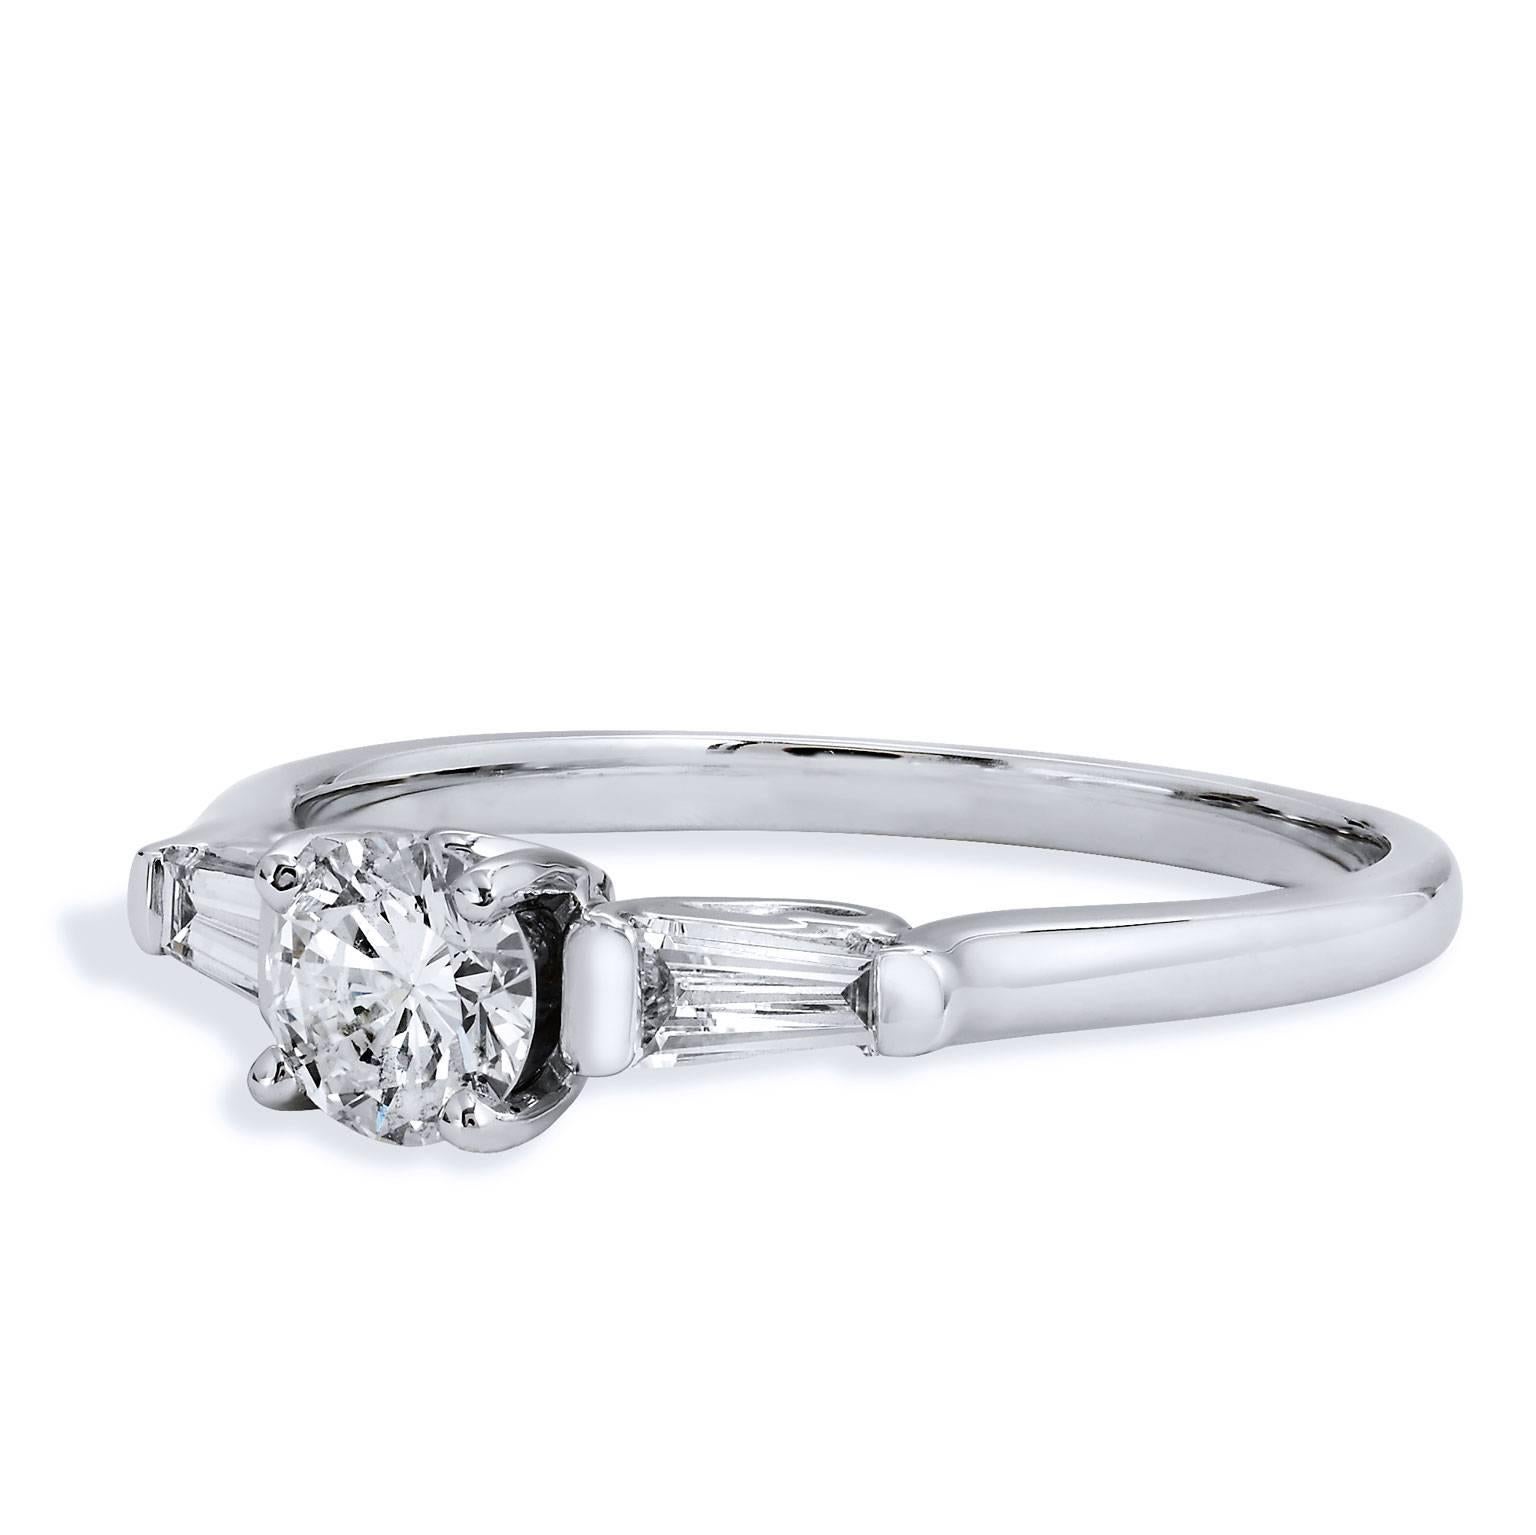 0.40 Carat Round Brilliant Cut 7 Baguette Diamond White Gold Engagement Ring

This is a handmade ring by H&H Jewels it has 14 karat white gold and features a 0.40 carat round brilliant cut diamond at center, with while two baguette cut diamonds,